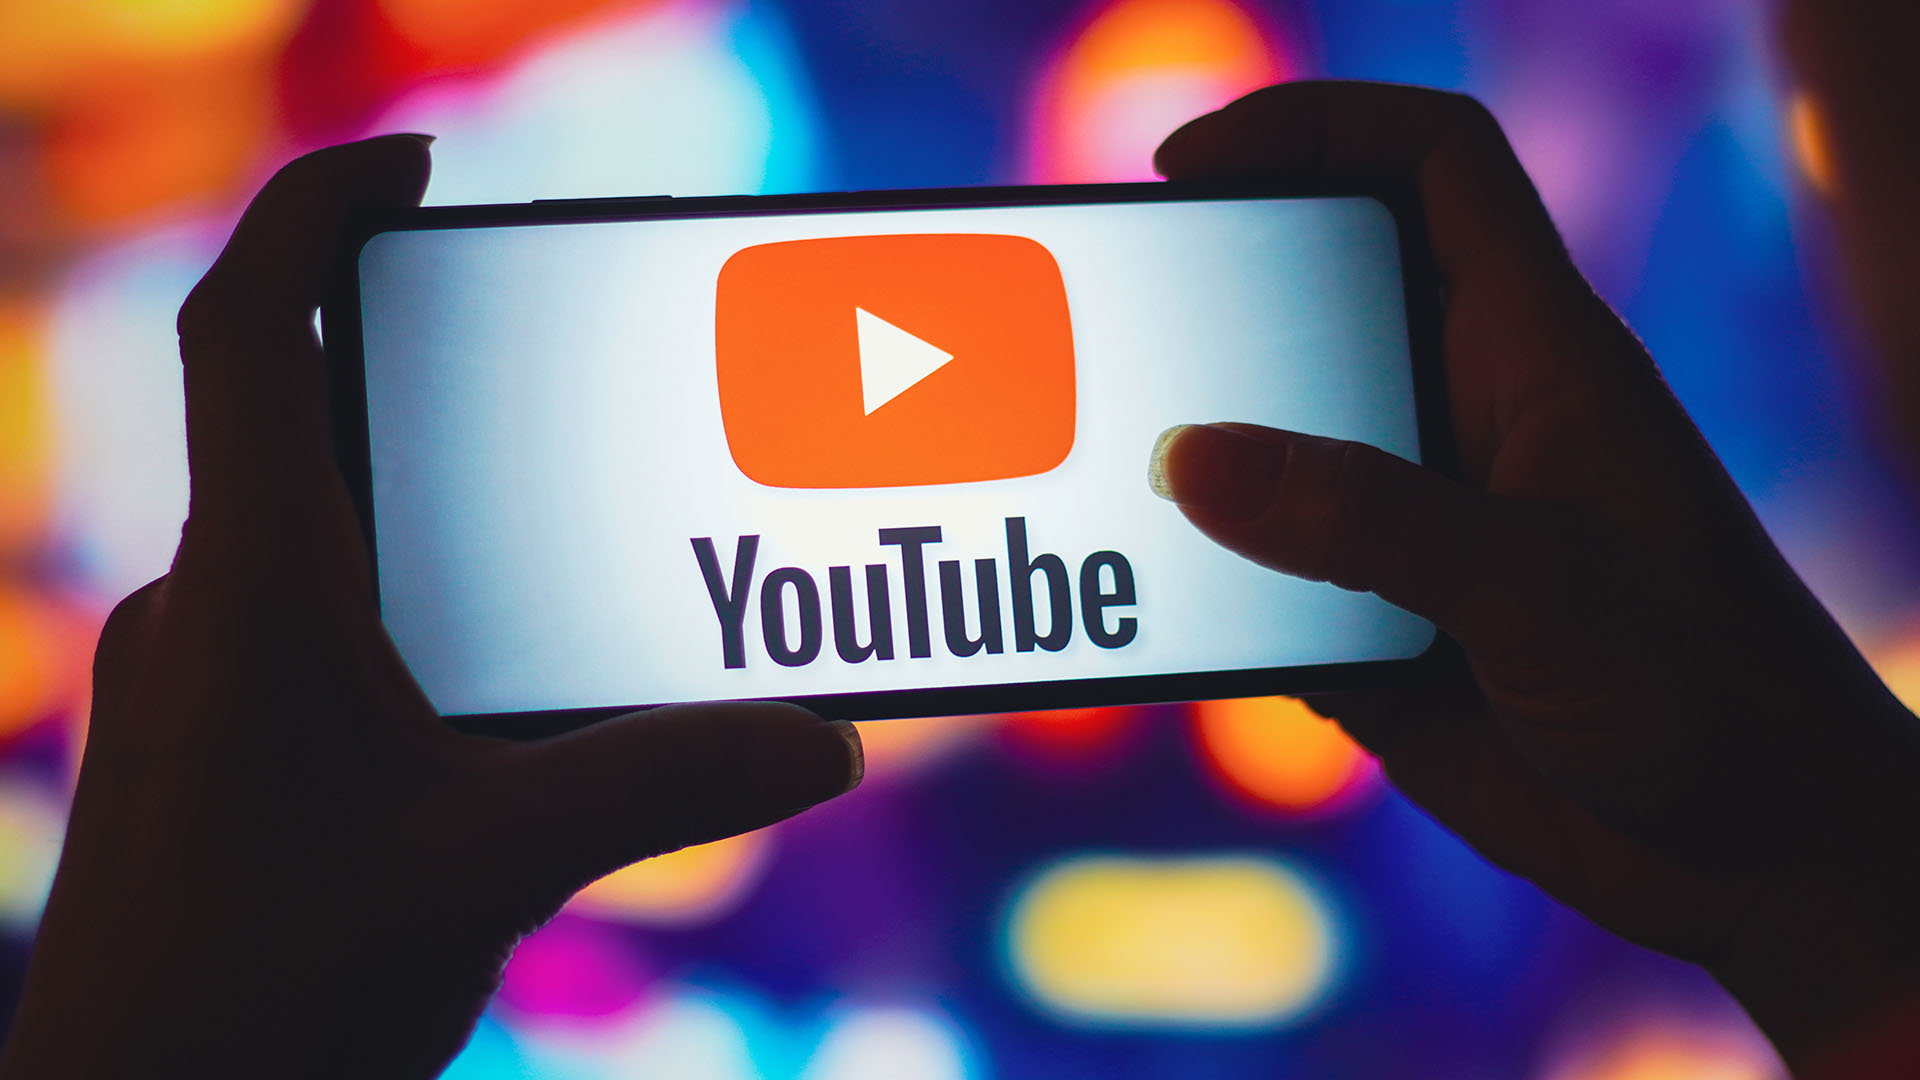 YouTube down updates — Hundreds of users report issues with video streaming and website